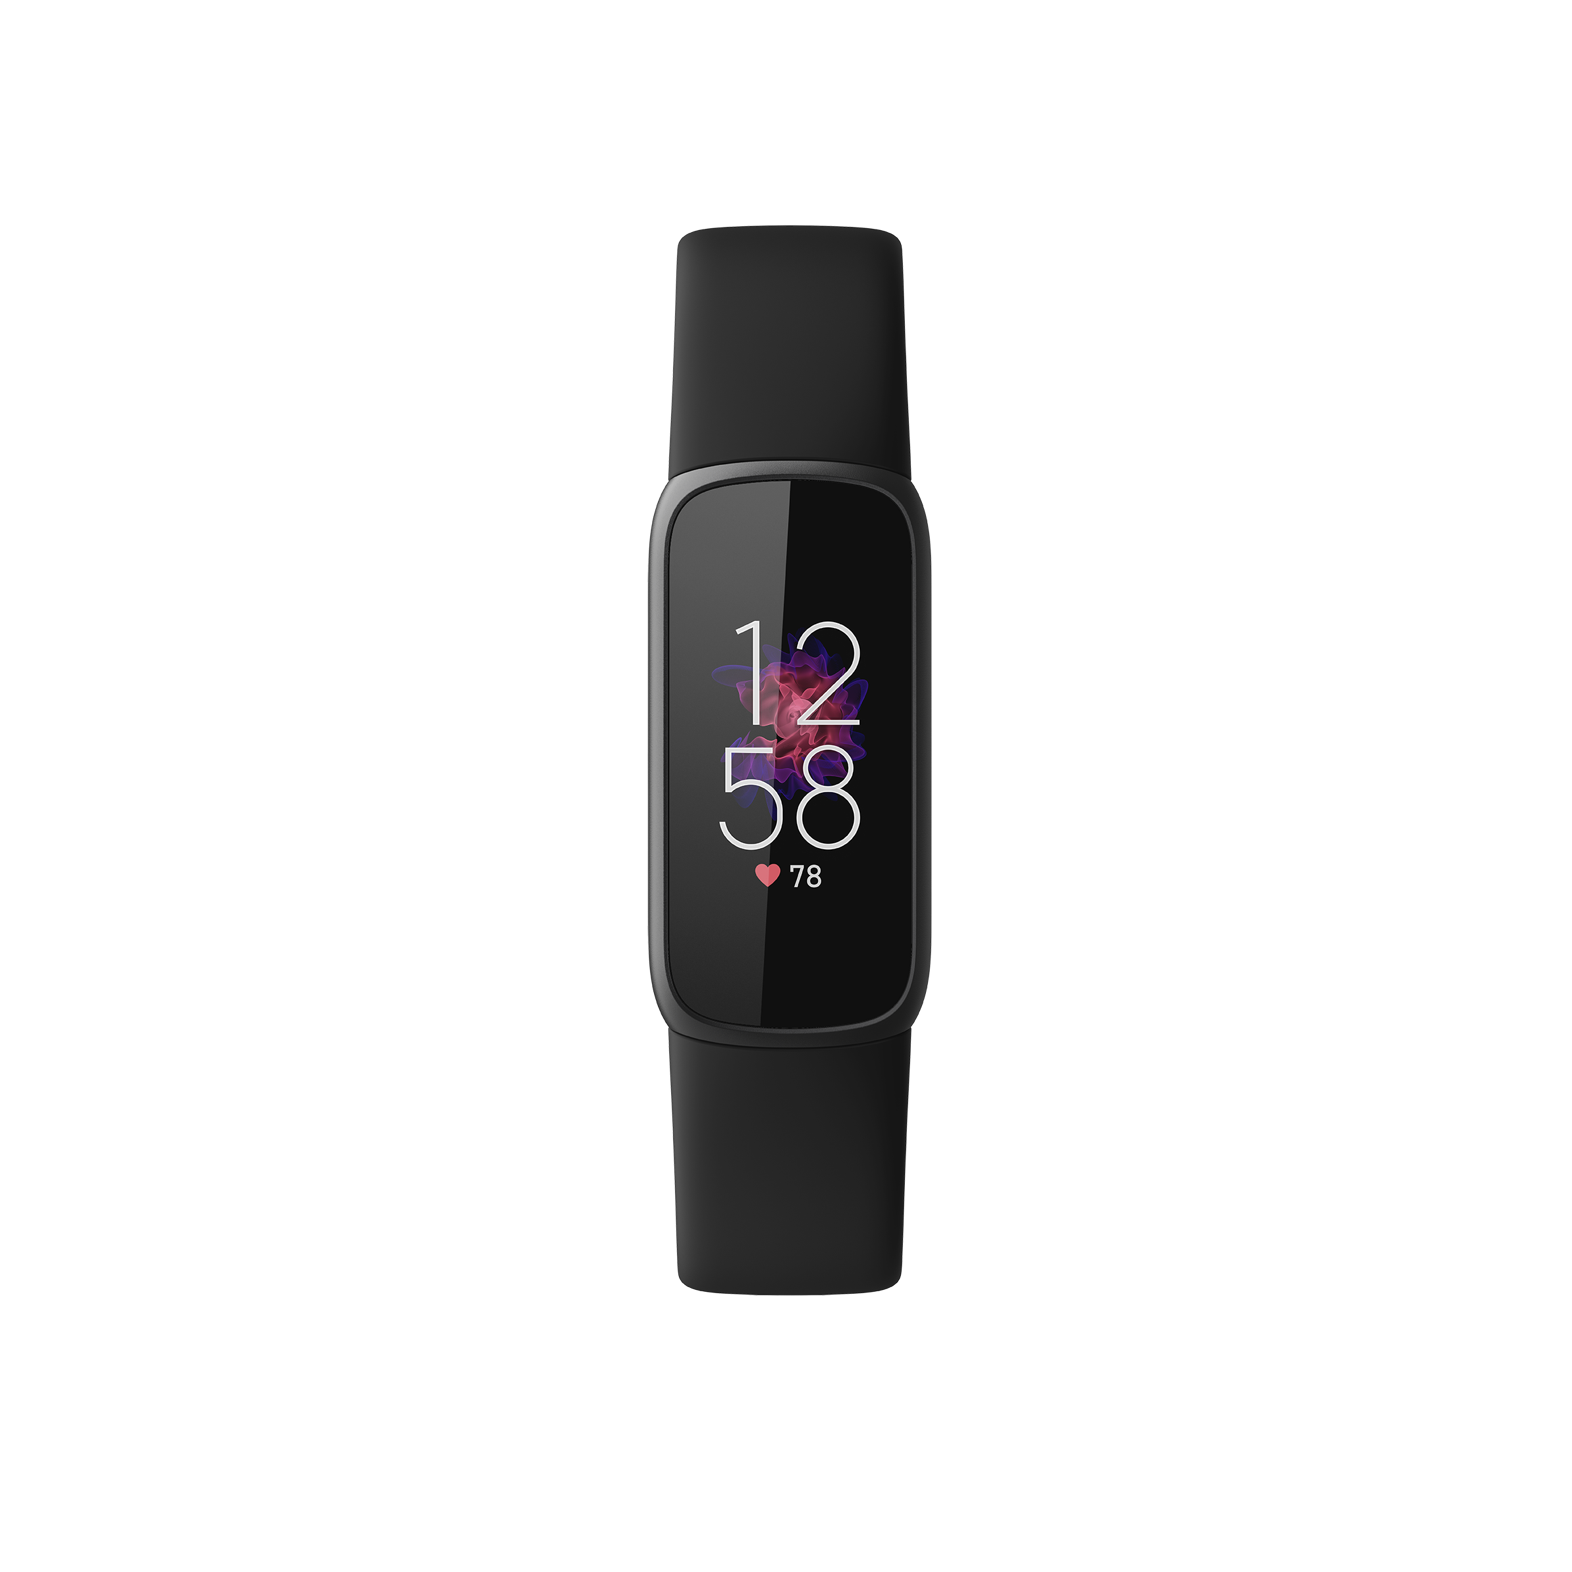 https://www.fitbit.com/global/content/dam/fitbit/global/pdp/devices/luxe/hero-static/black/luxe-black-device-front.png